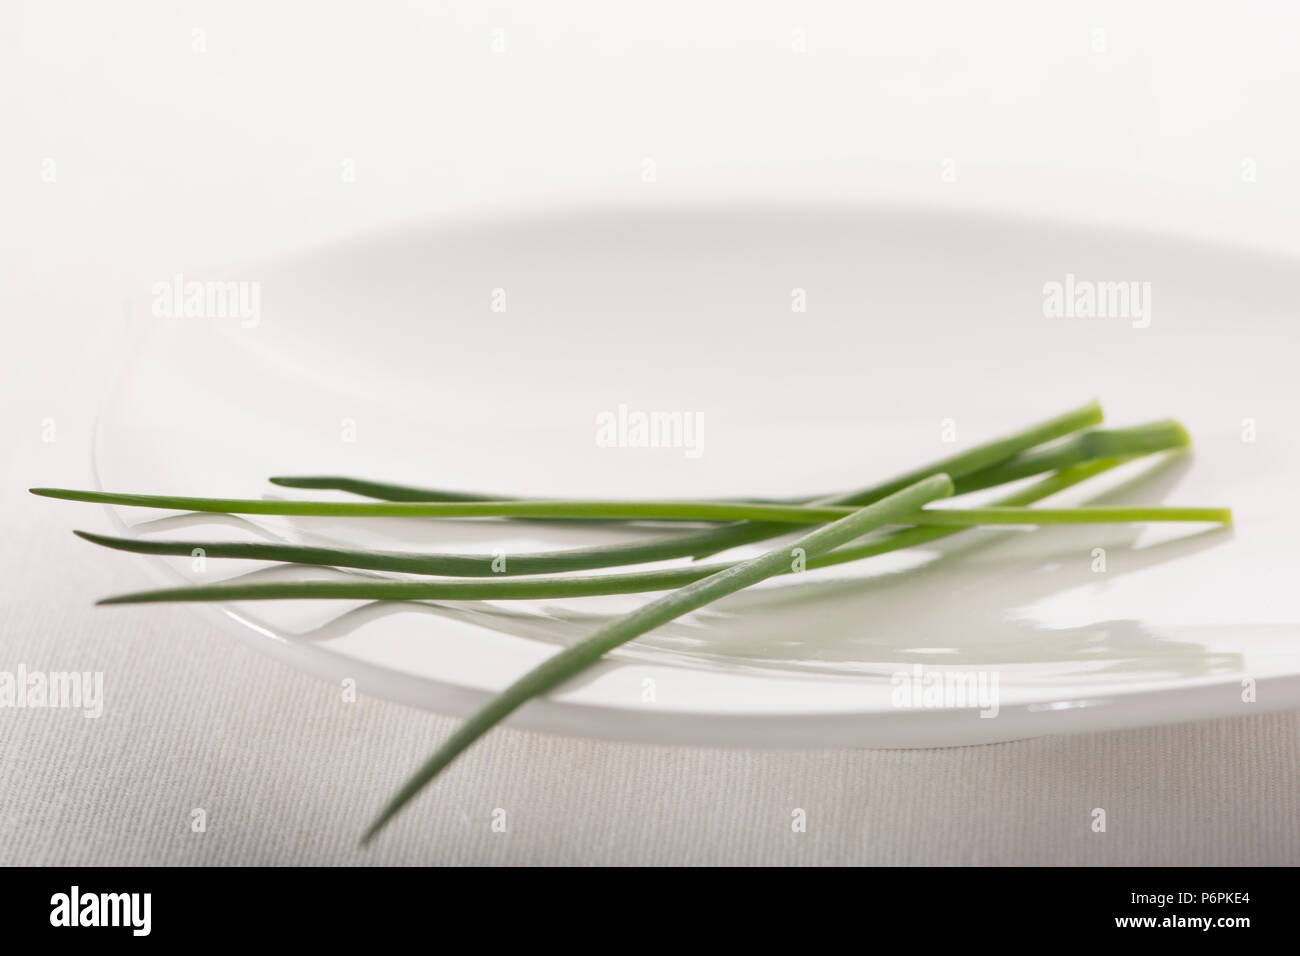 Close up of some scapes of  the common green herb chives, on a white plate against a white background Stock Photo